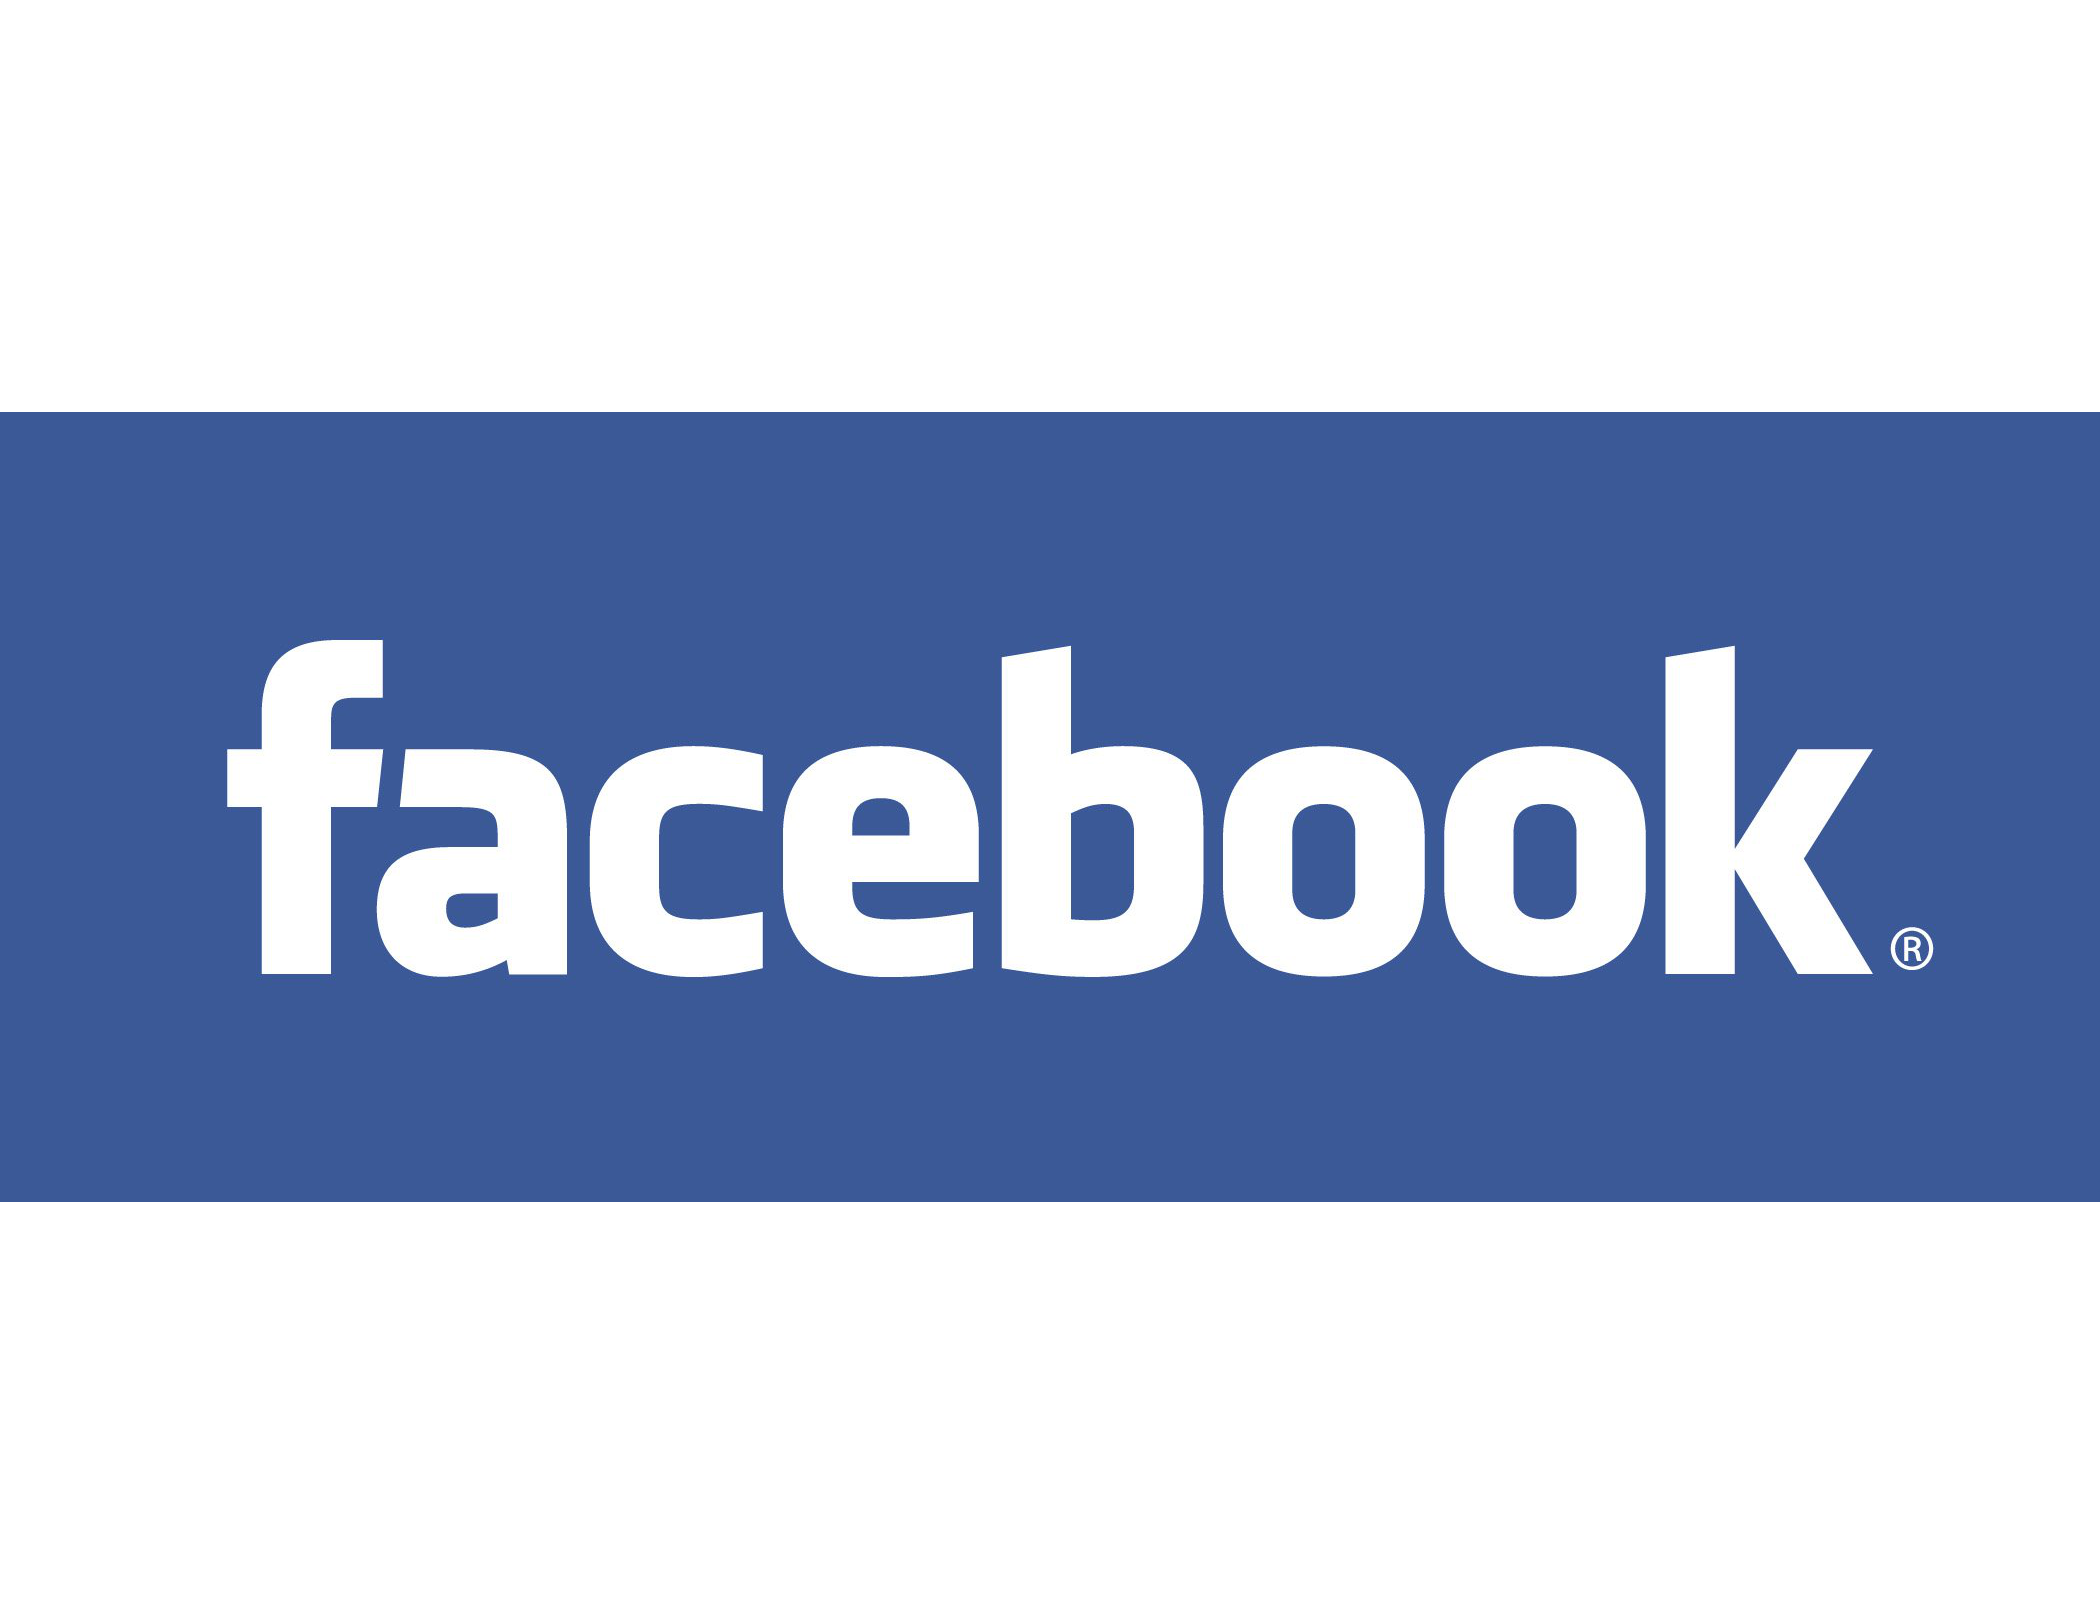 Facebook Logo Pic Png Transparent Background Free Download 30 Freeiconspng